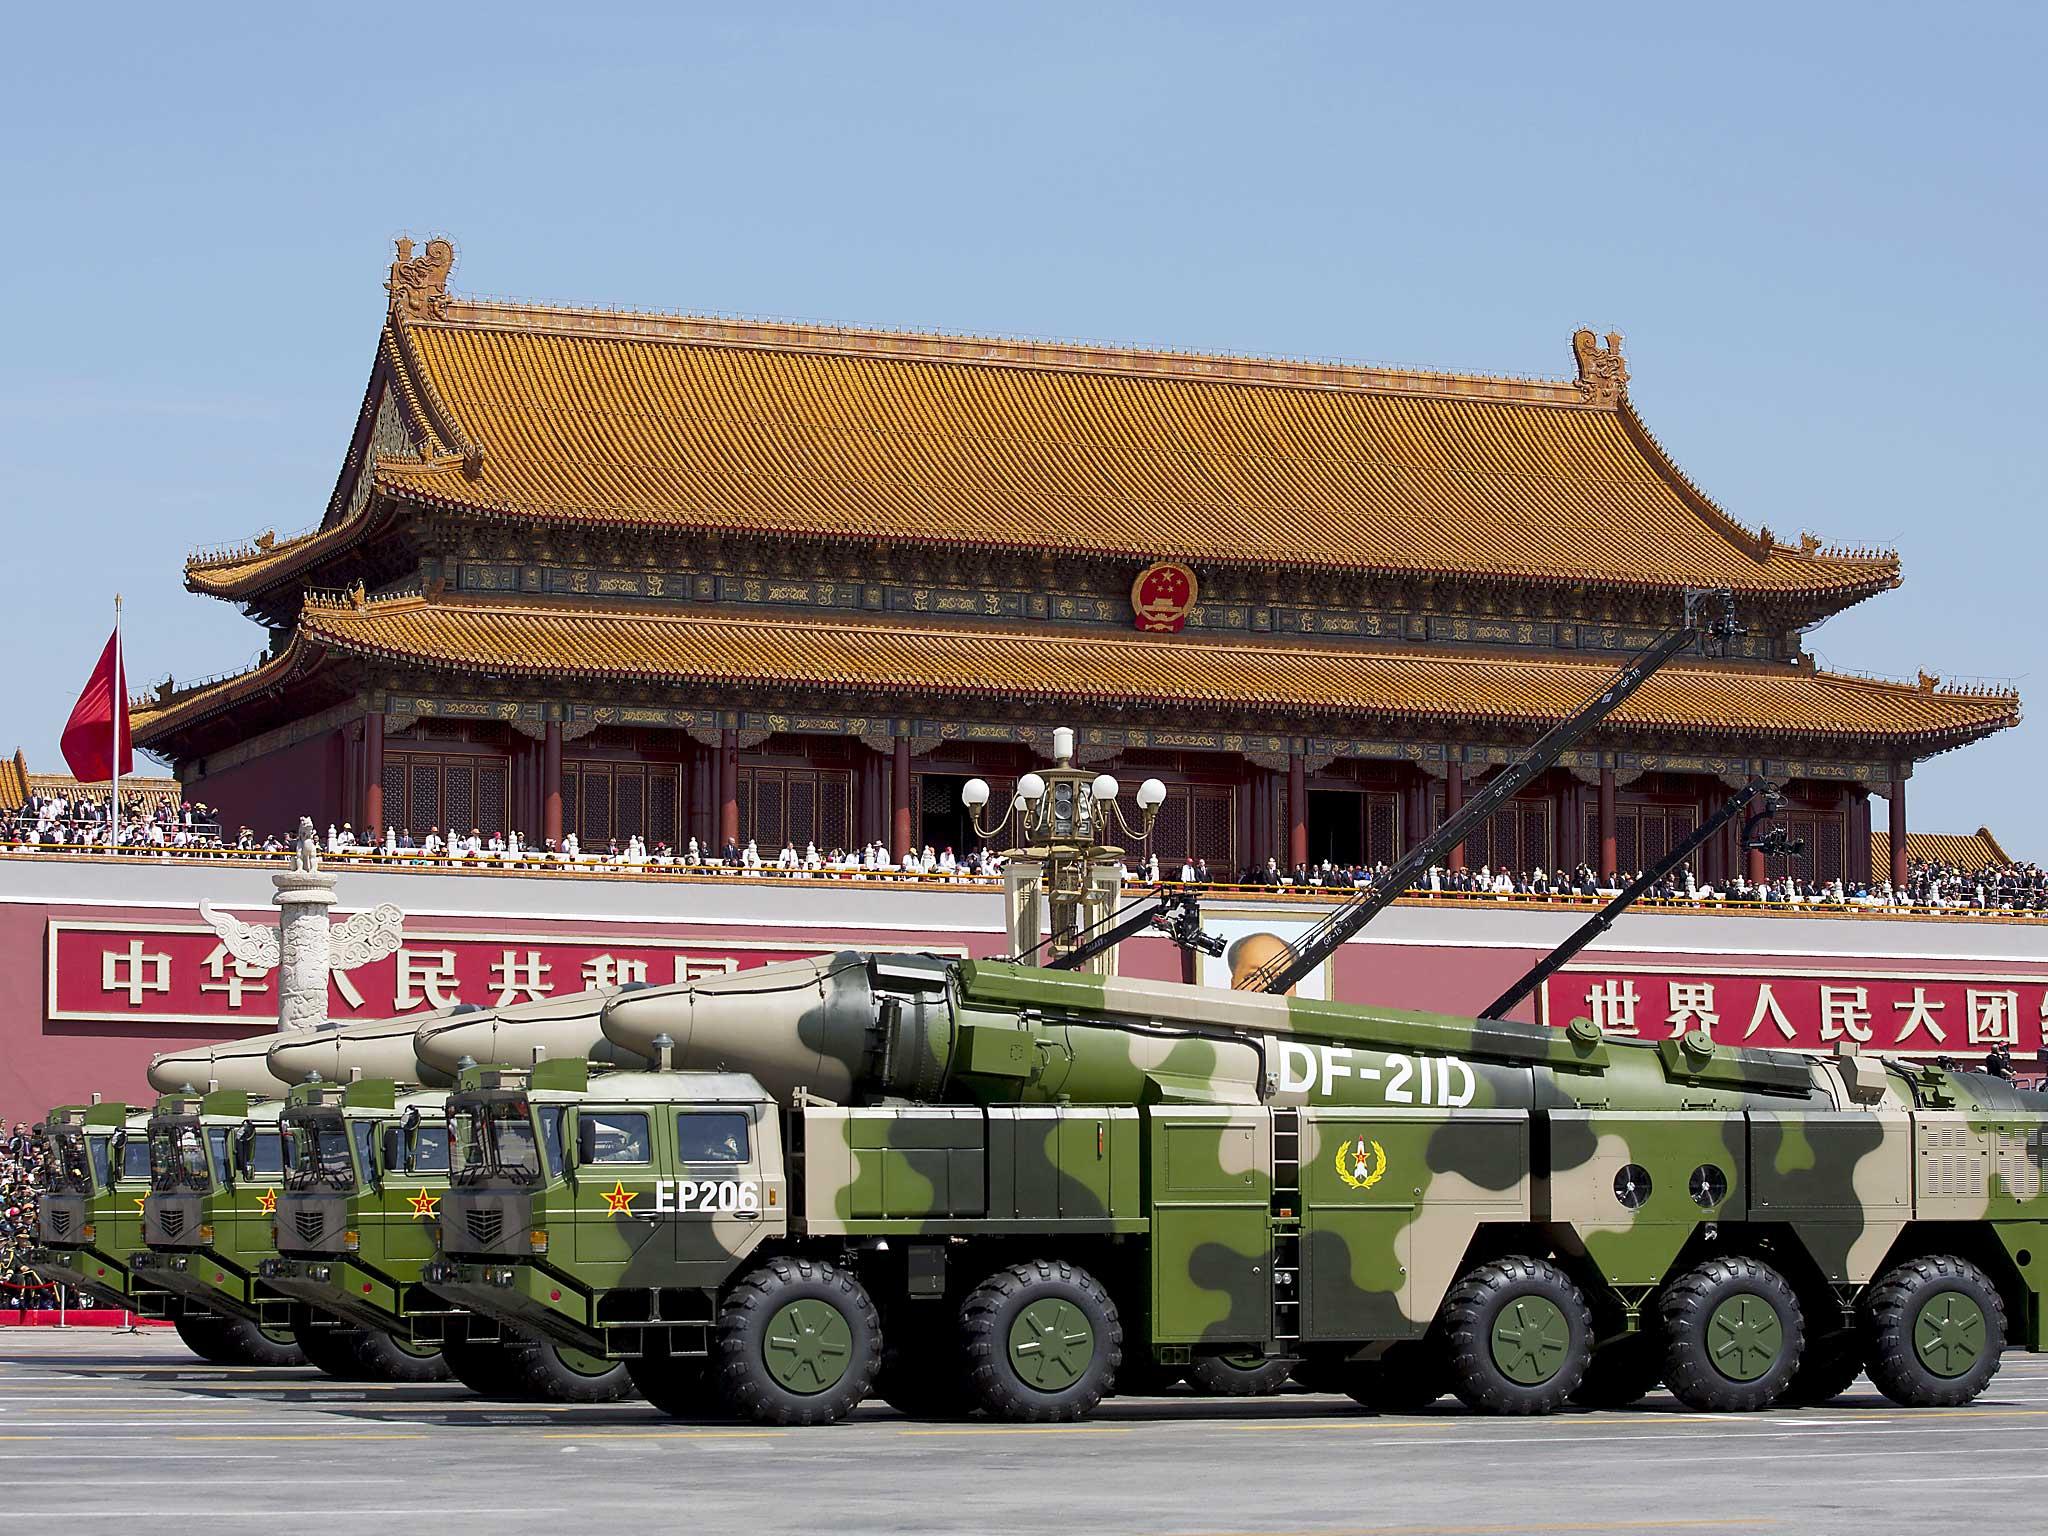 Chinese military vehicles carrying DF-21D anti-ship ballistic missiles, potentially capable of sinking a U.S. Nimitz-class aircraft carrier in a single strike, travel past Tiananmen Gate during a military parade to commemorate the 70th anniversary of the end of World War II in Beijing